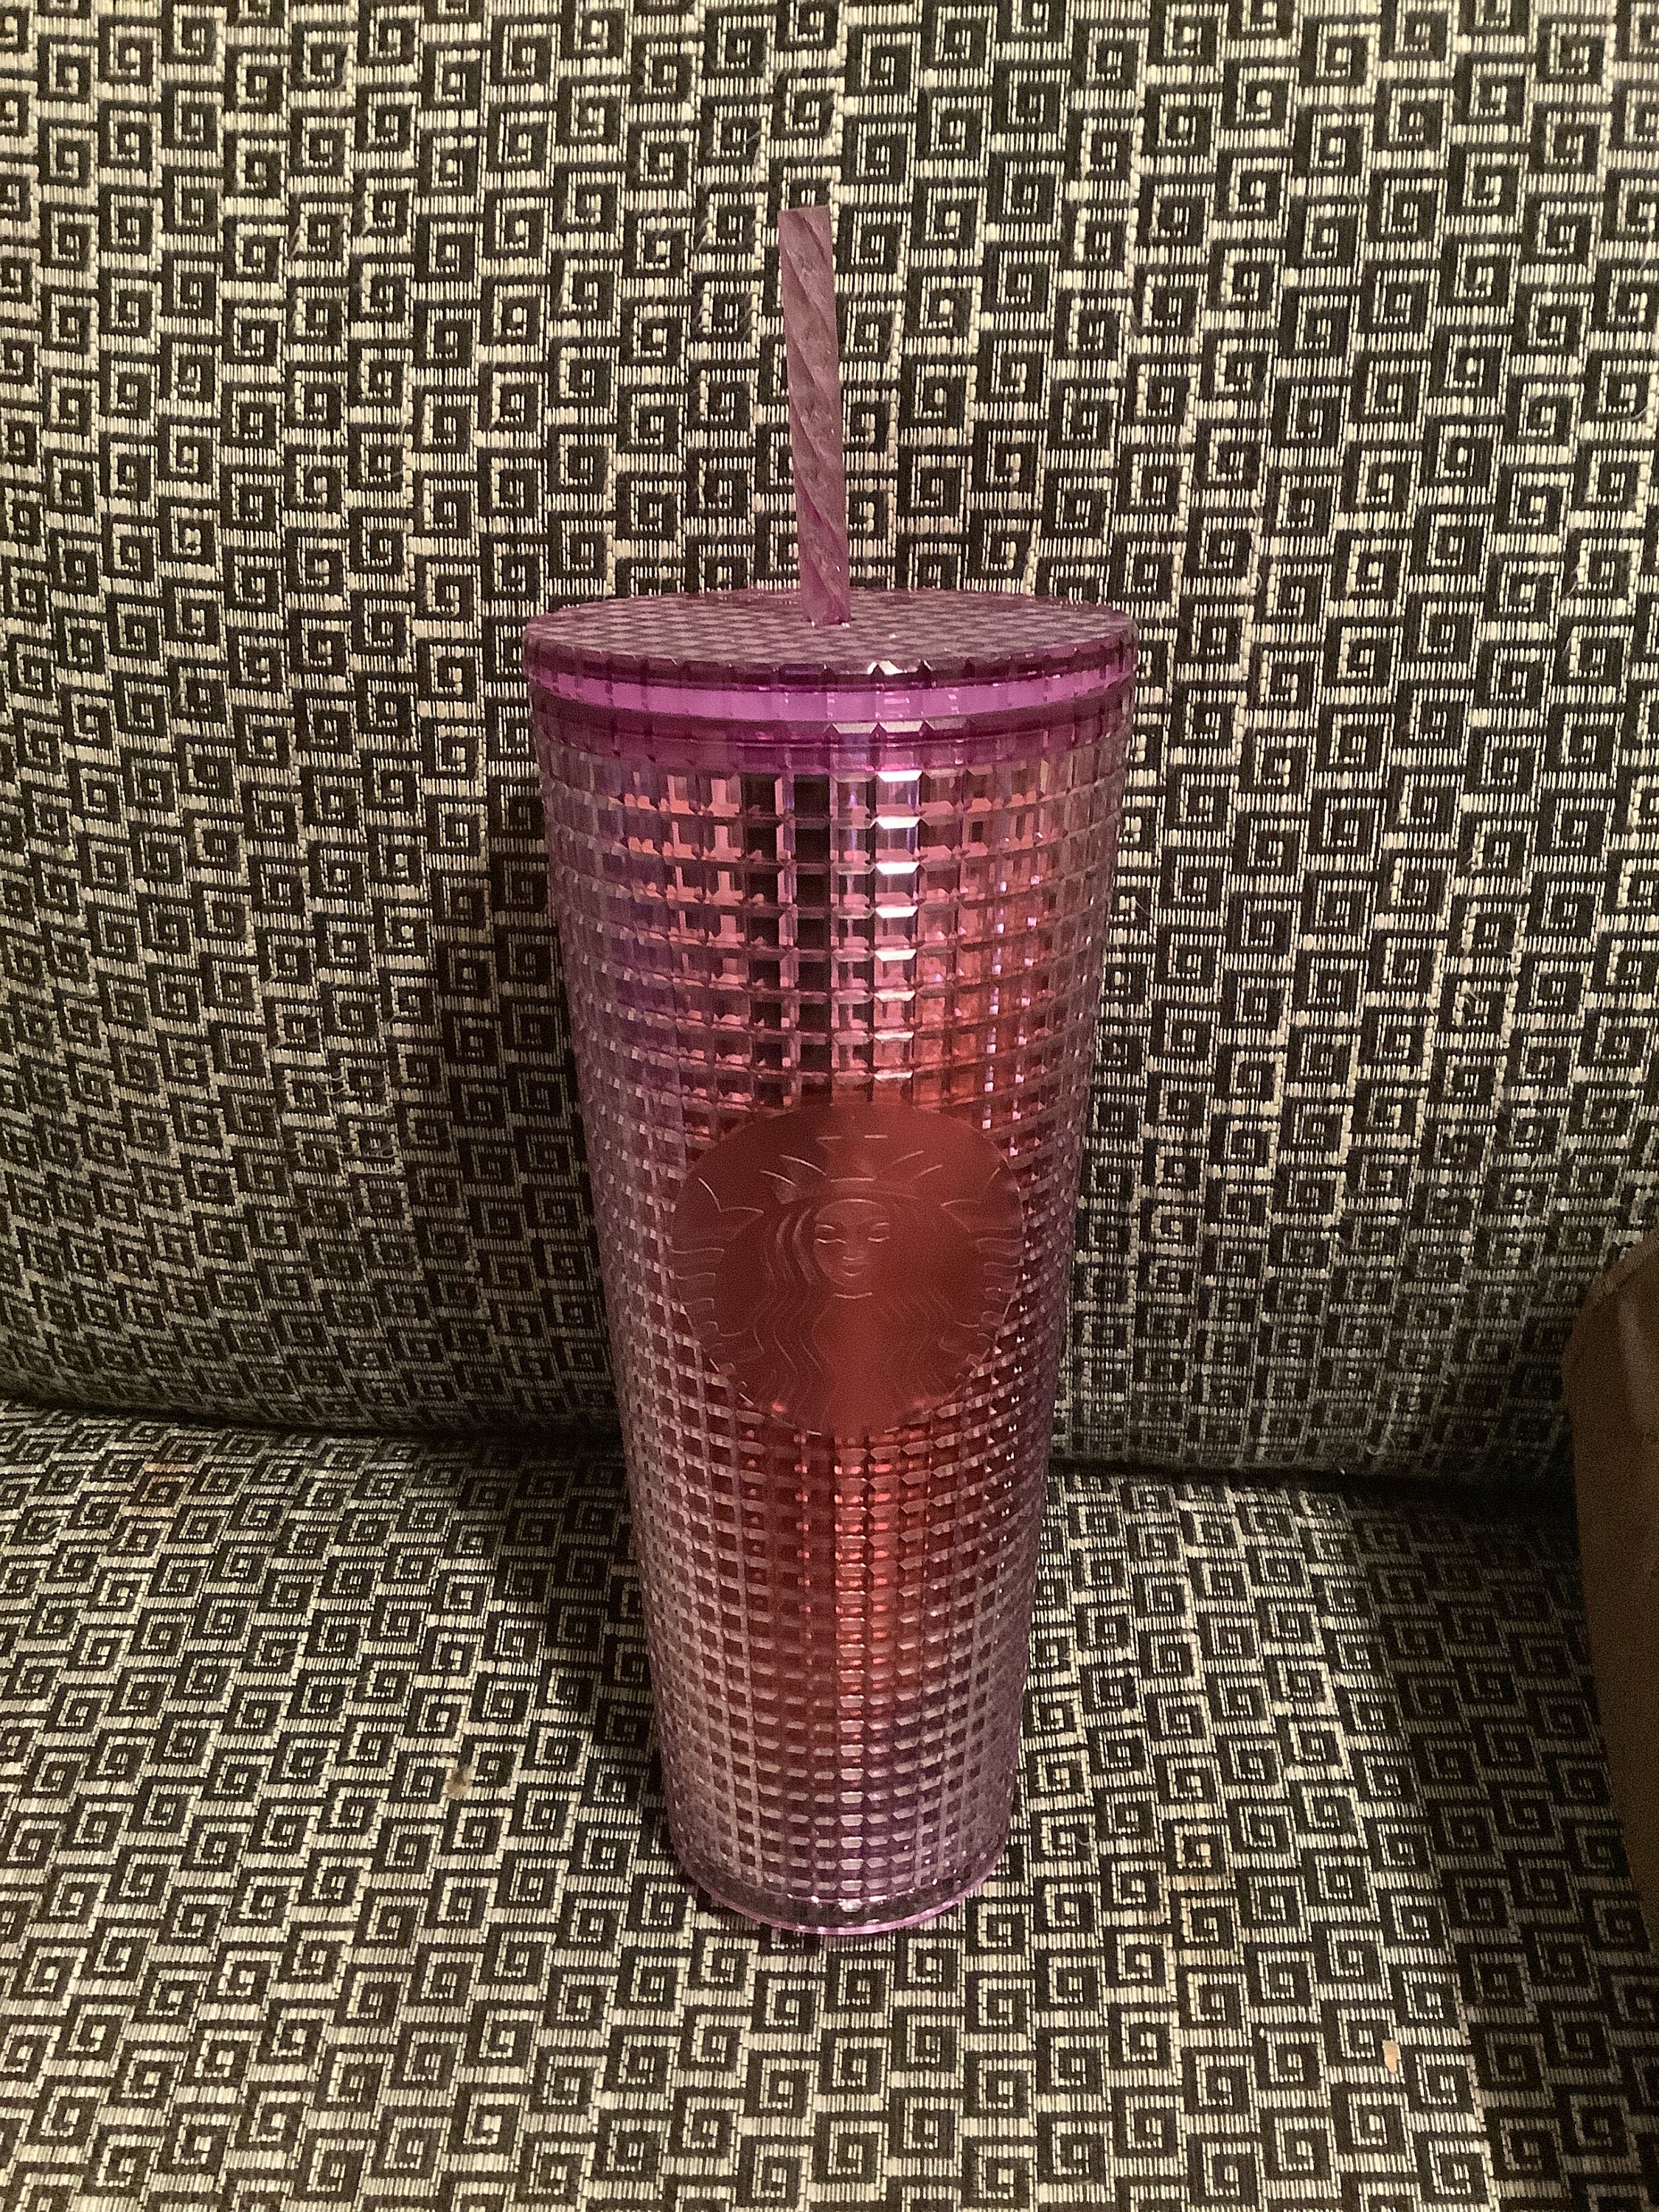 Mermaid Starbucks Mug 2022 Bling Chrome Gold Berry Sanborn Cabrillo Studded  Rare Starbucks Tumblers With Cold Cup And 24oz Venti Grande Keychain From  Angeldh2020, $15.55